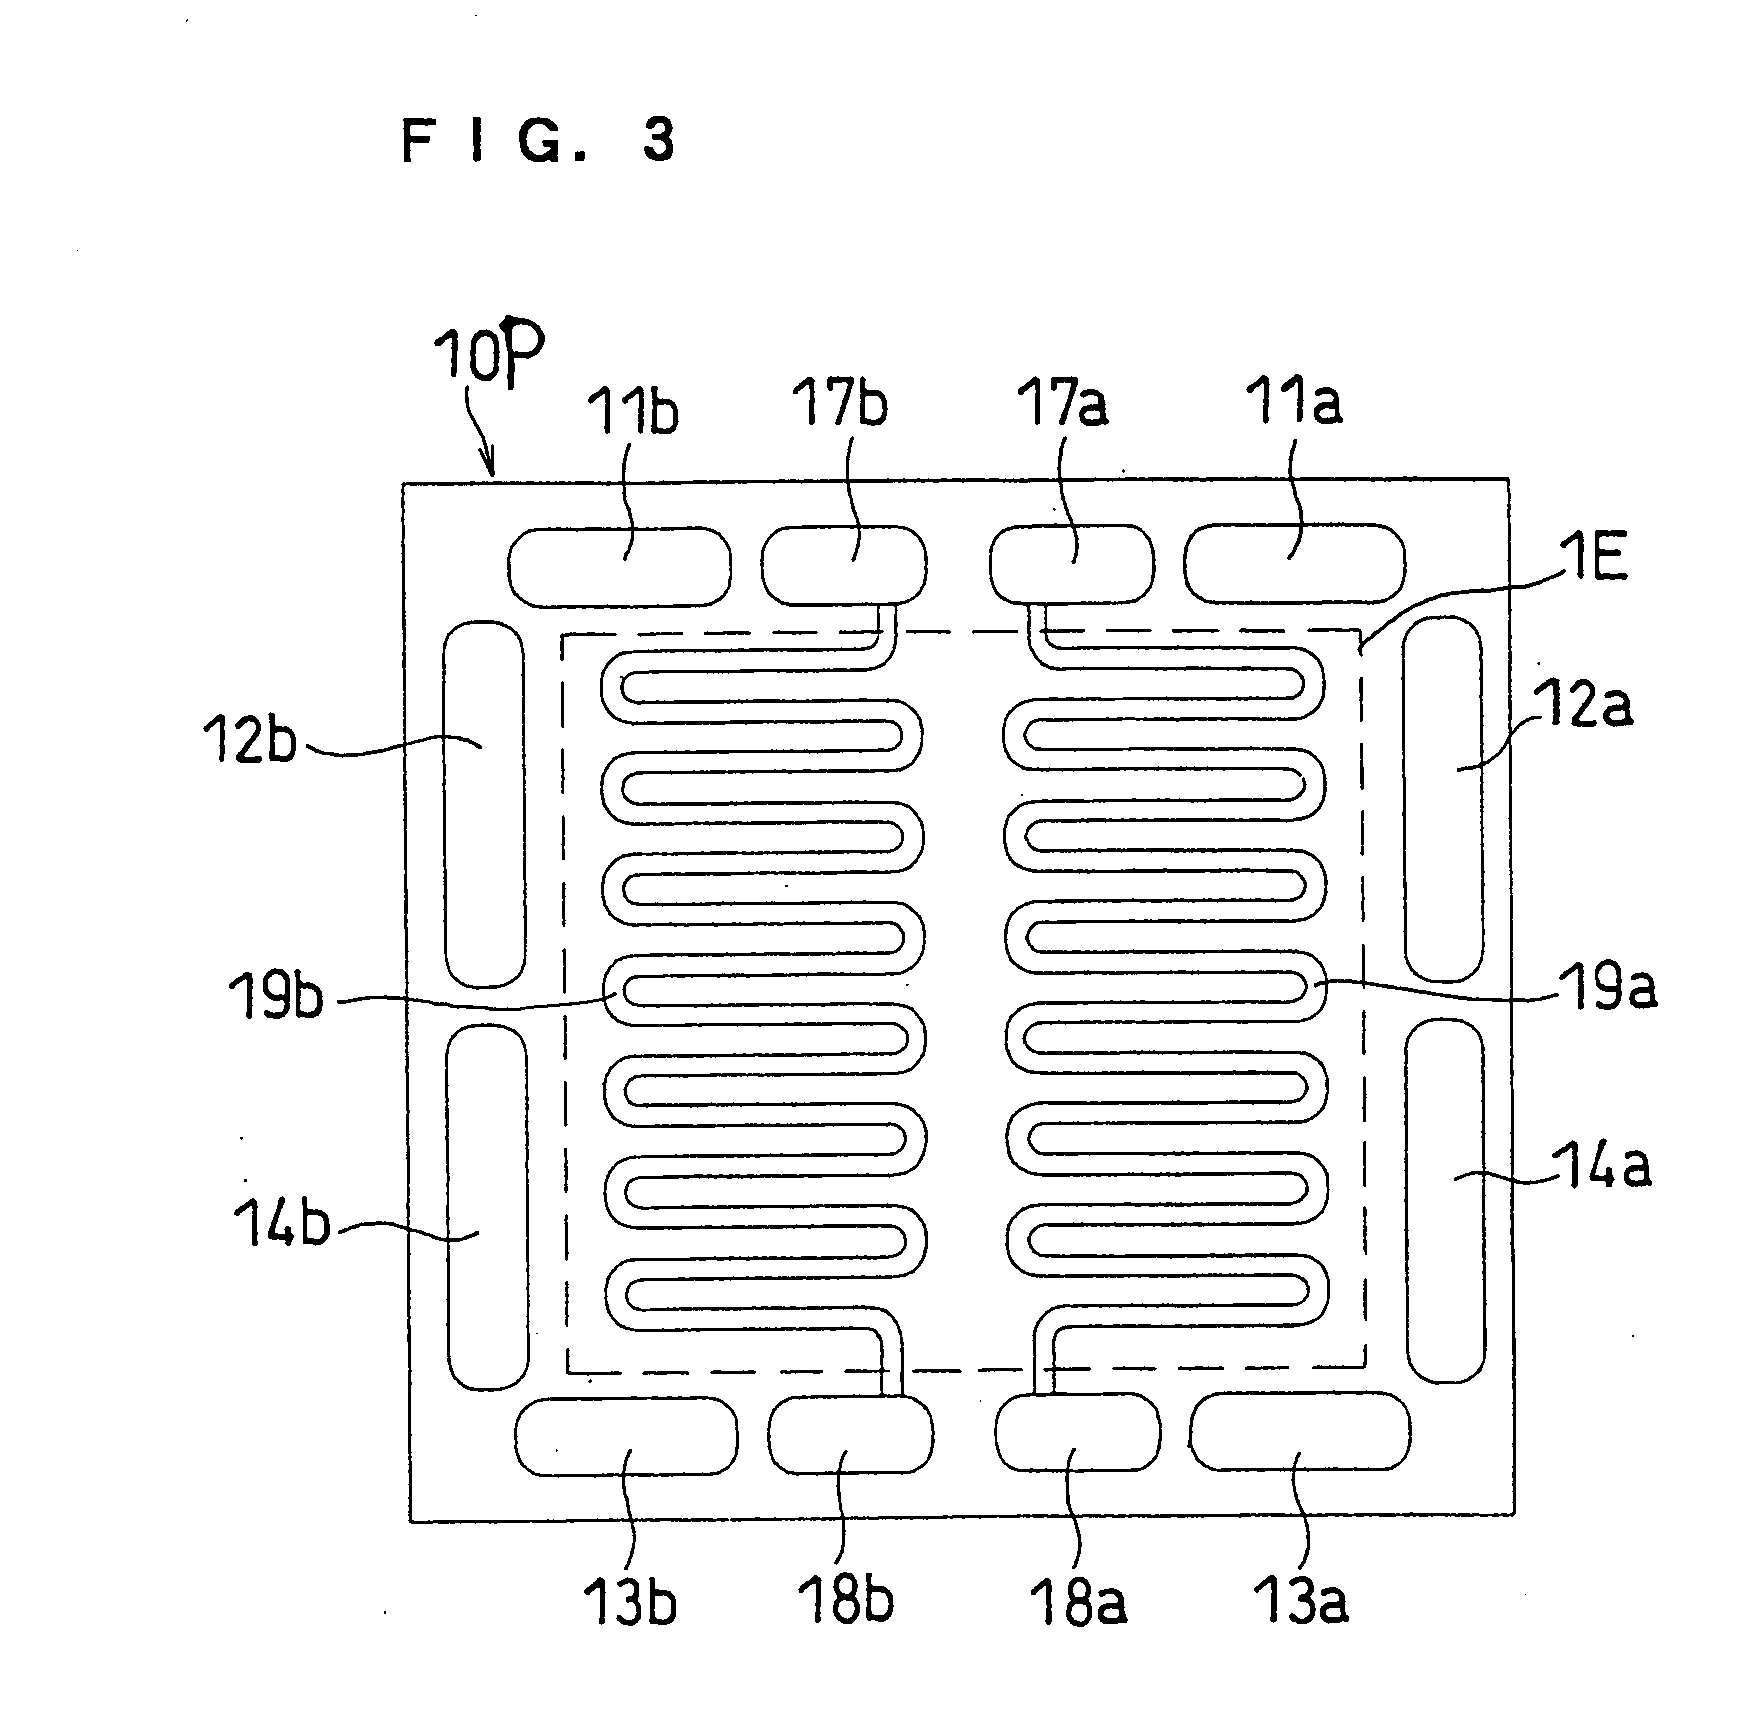 Fuel cell, separator plate for a fuel cell, and method of operation of a fuel cell